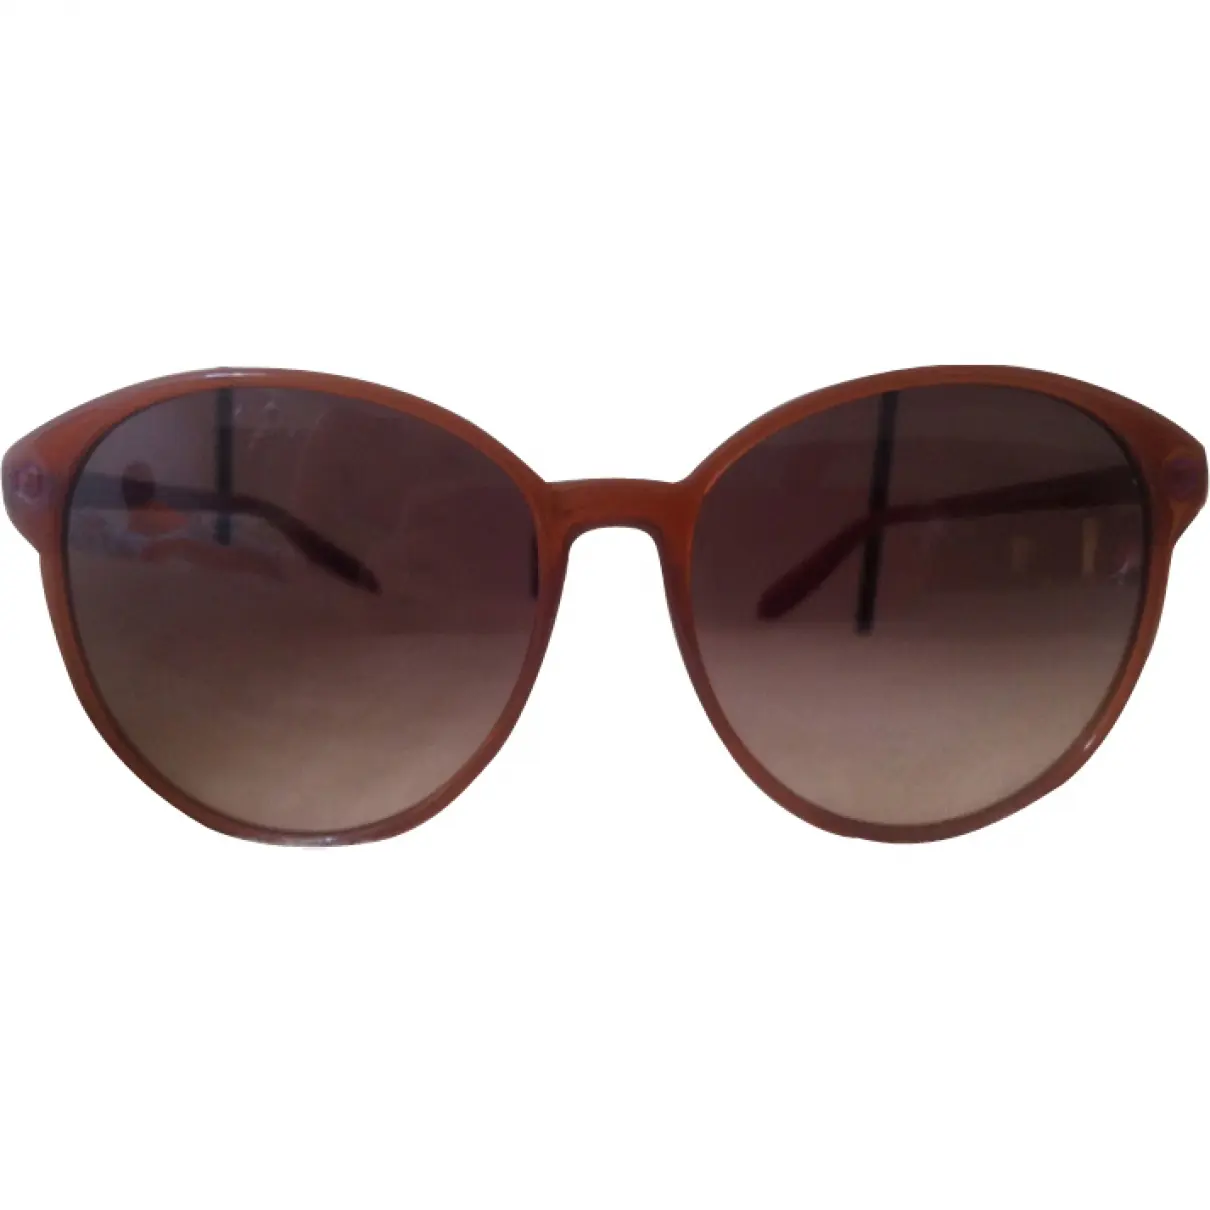 Sunglasses Marc by Marc Jacobs